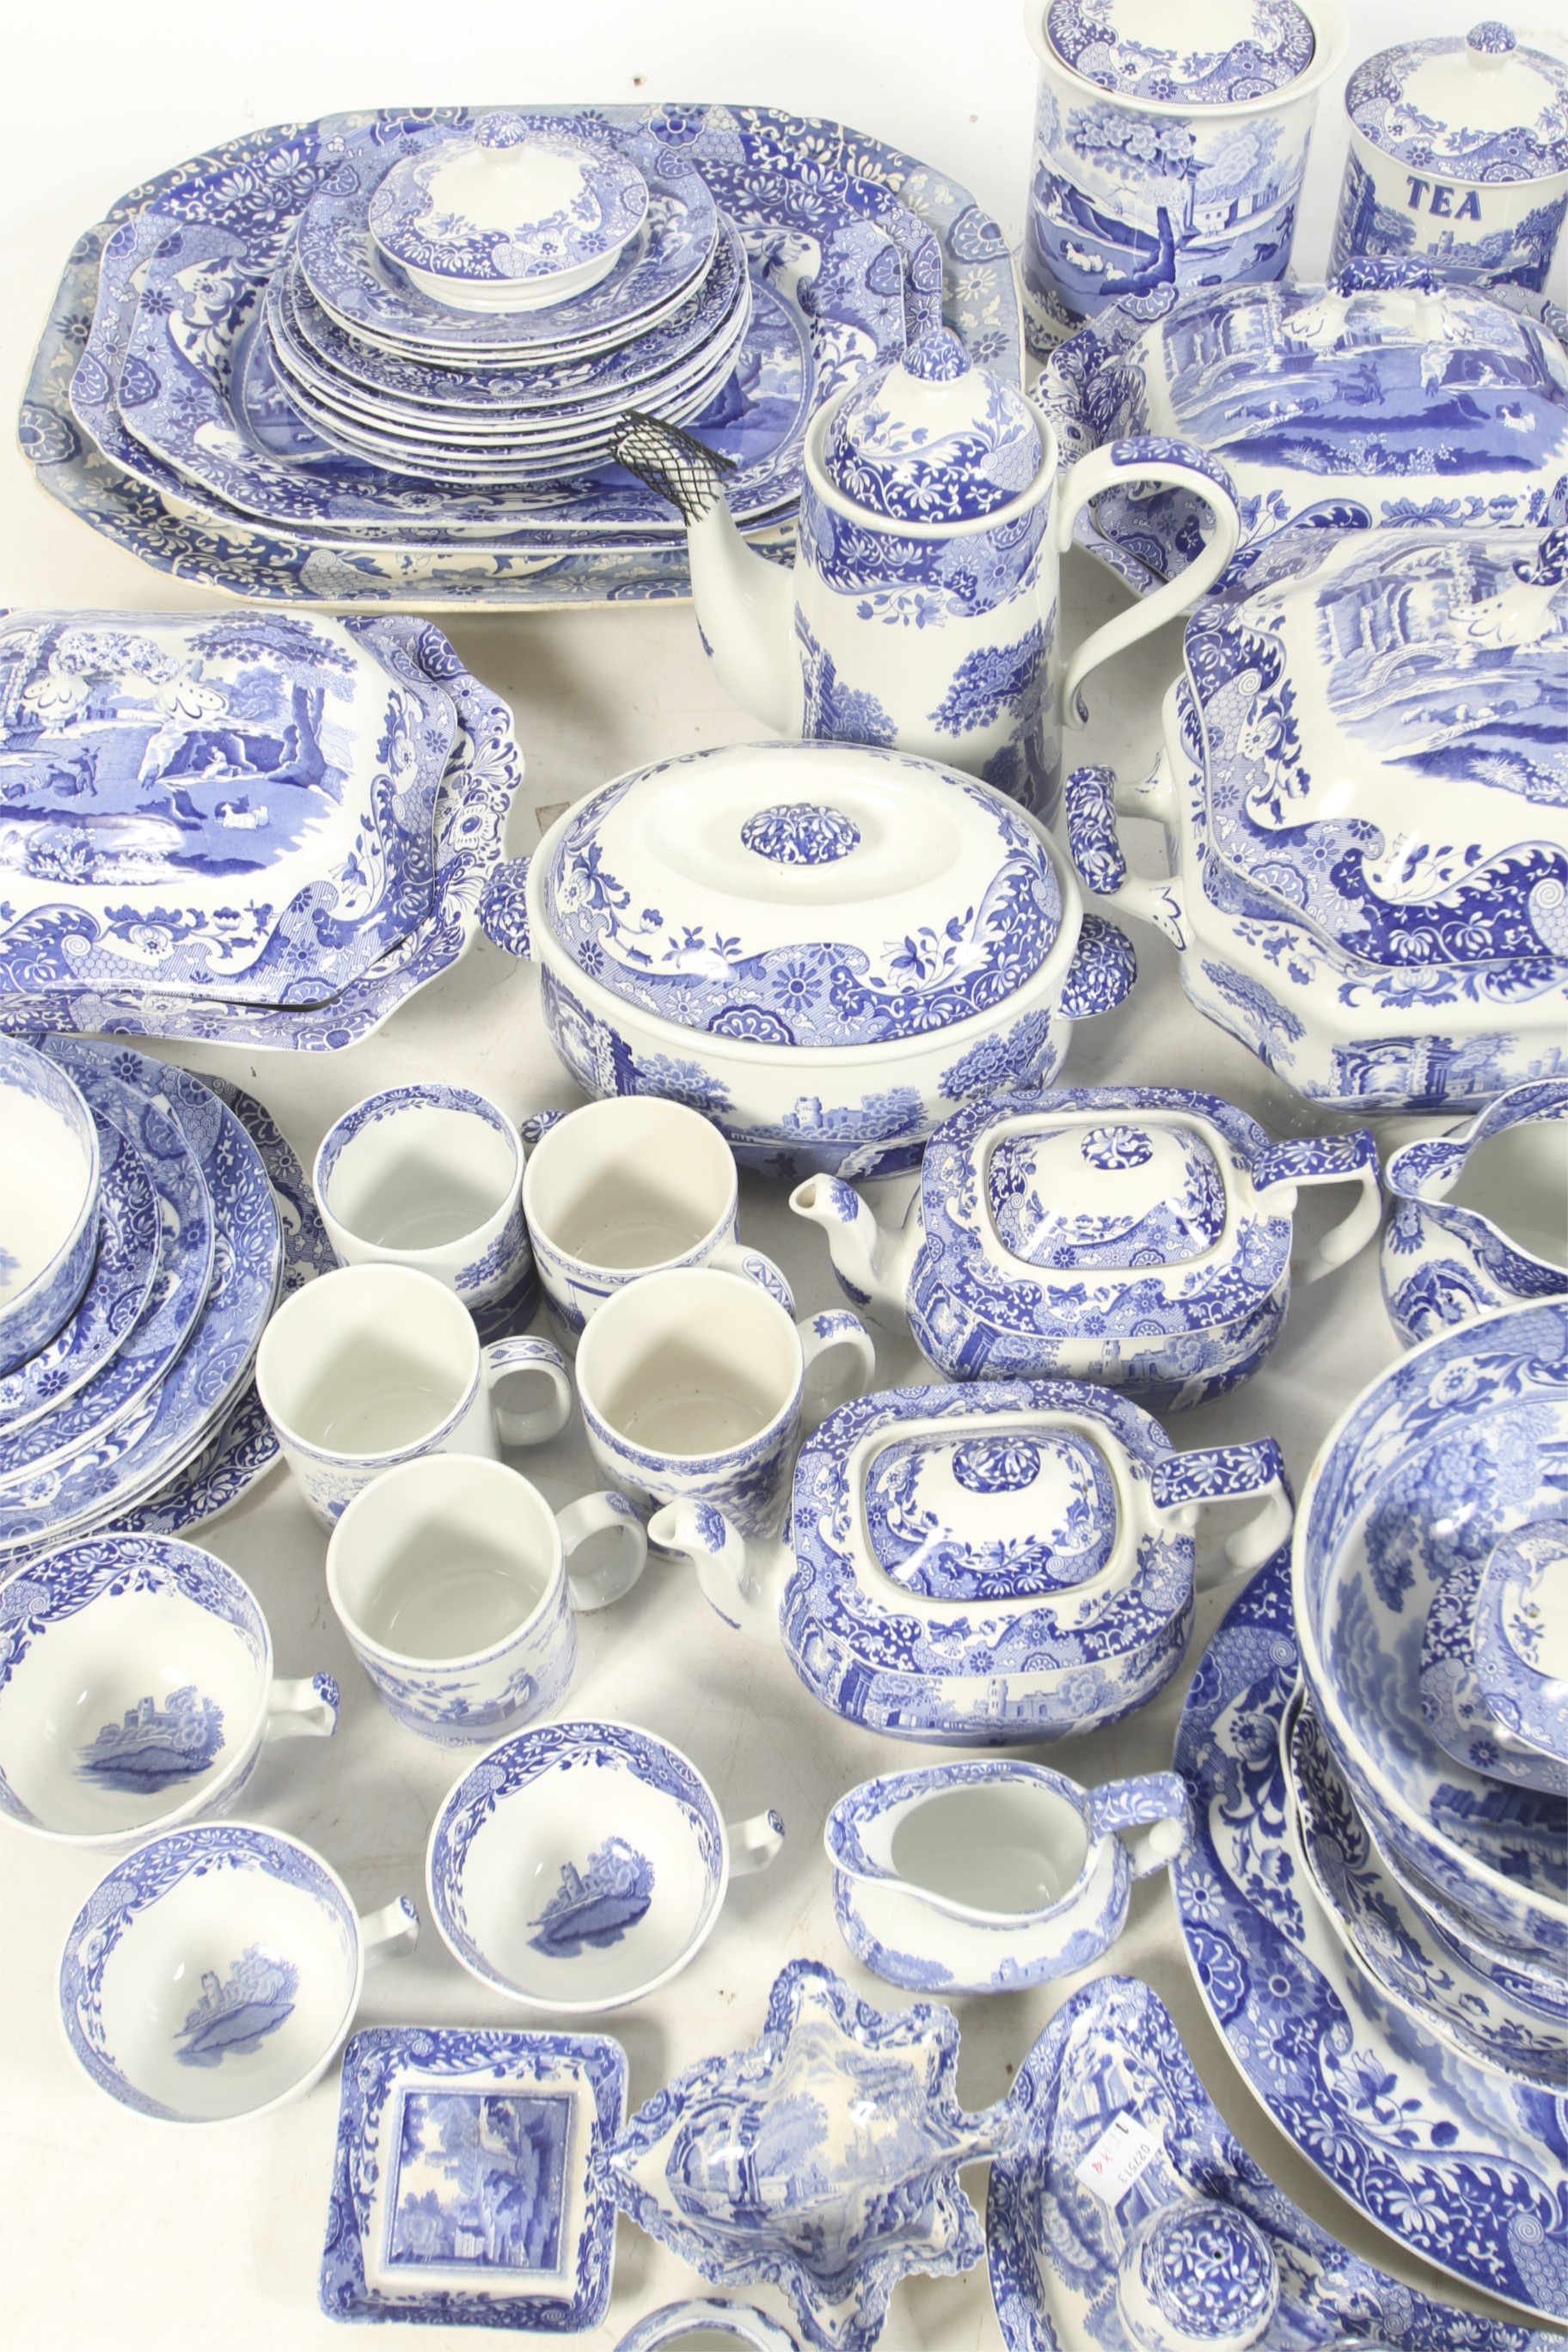 19th century and later Spode and Copeland blue Italian ceramics. - Image 2 of 3